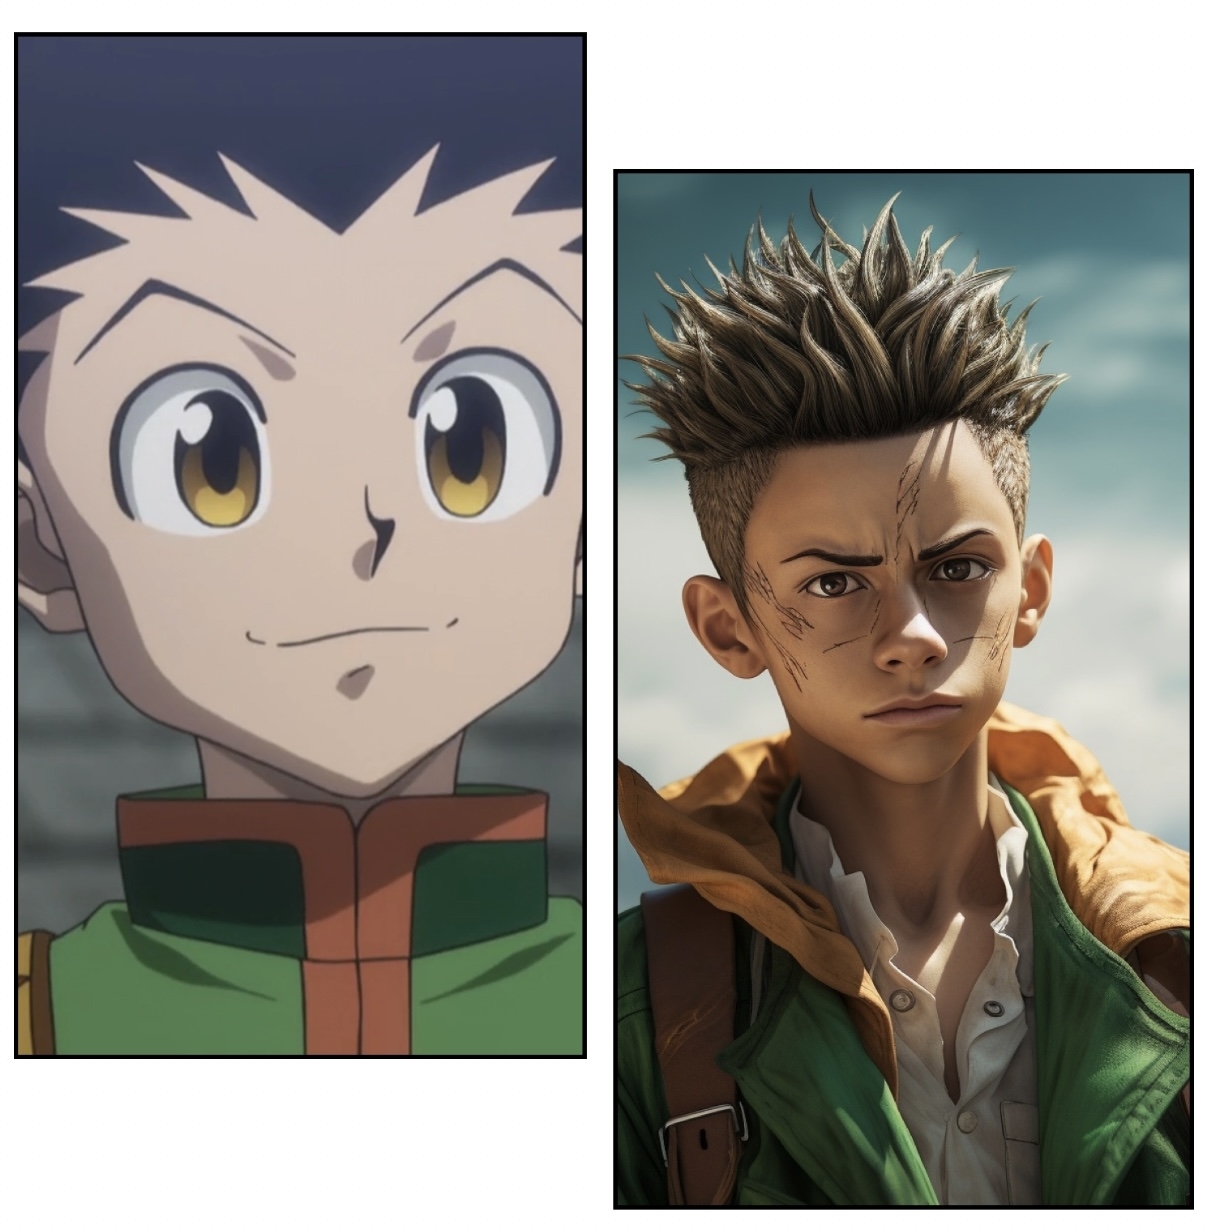 A boy in a green jacket with spiky hair.